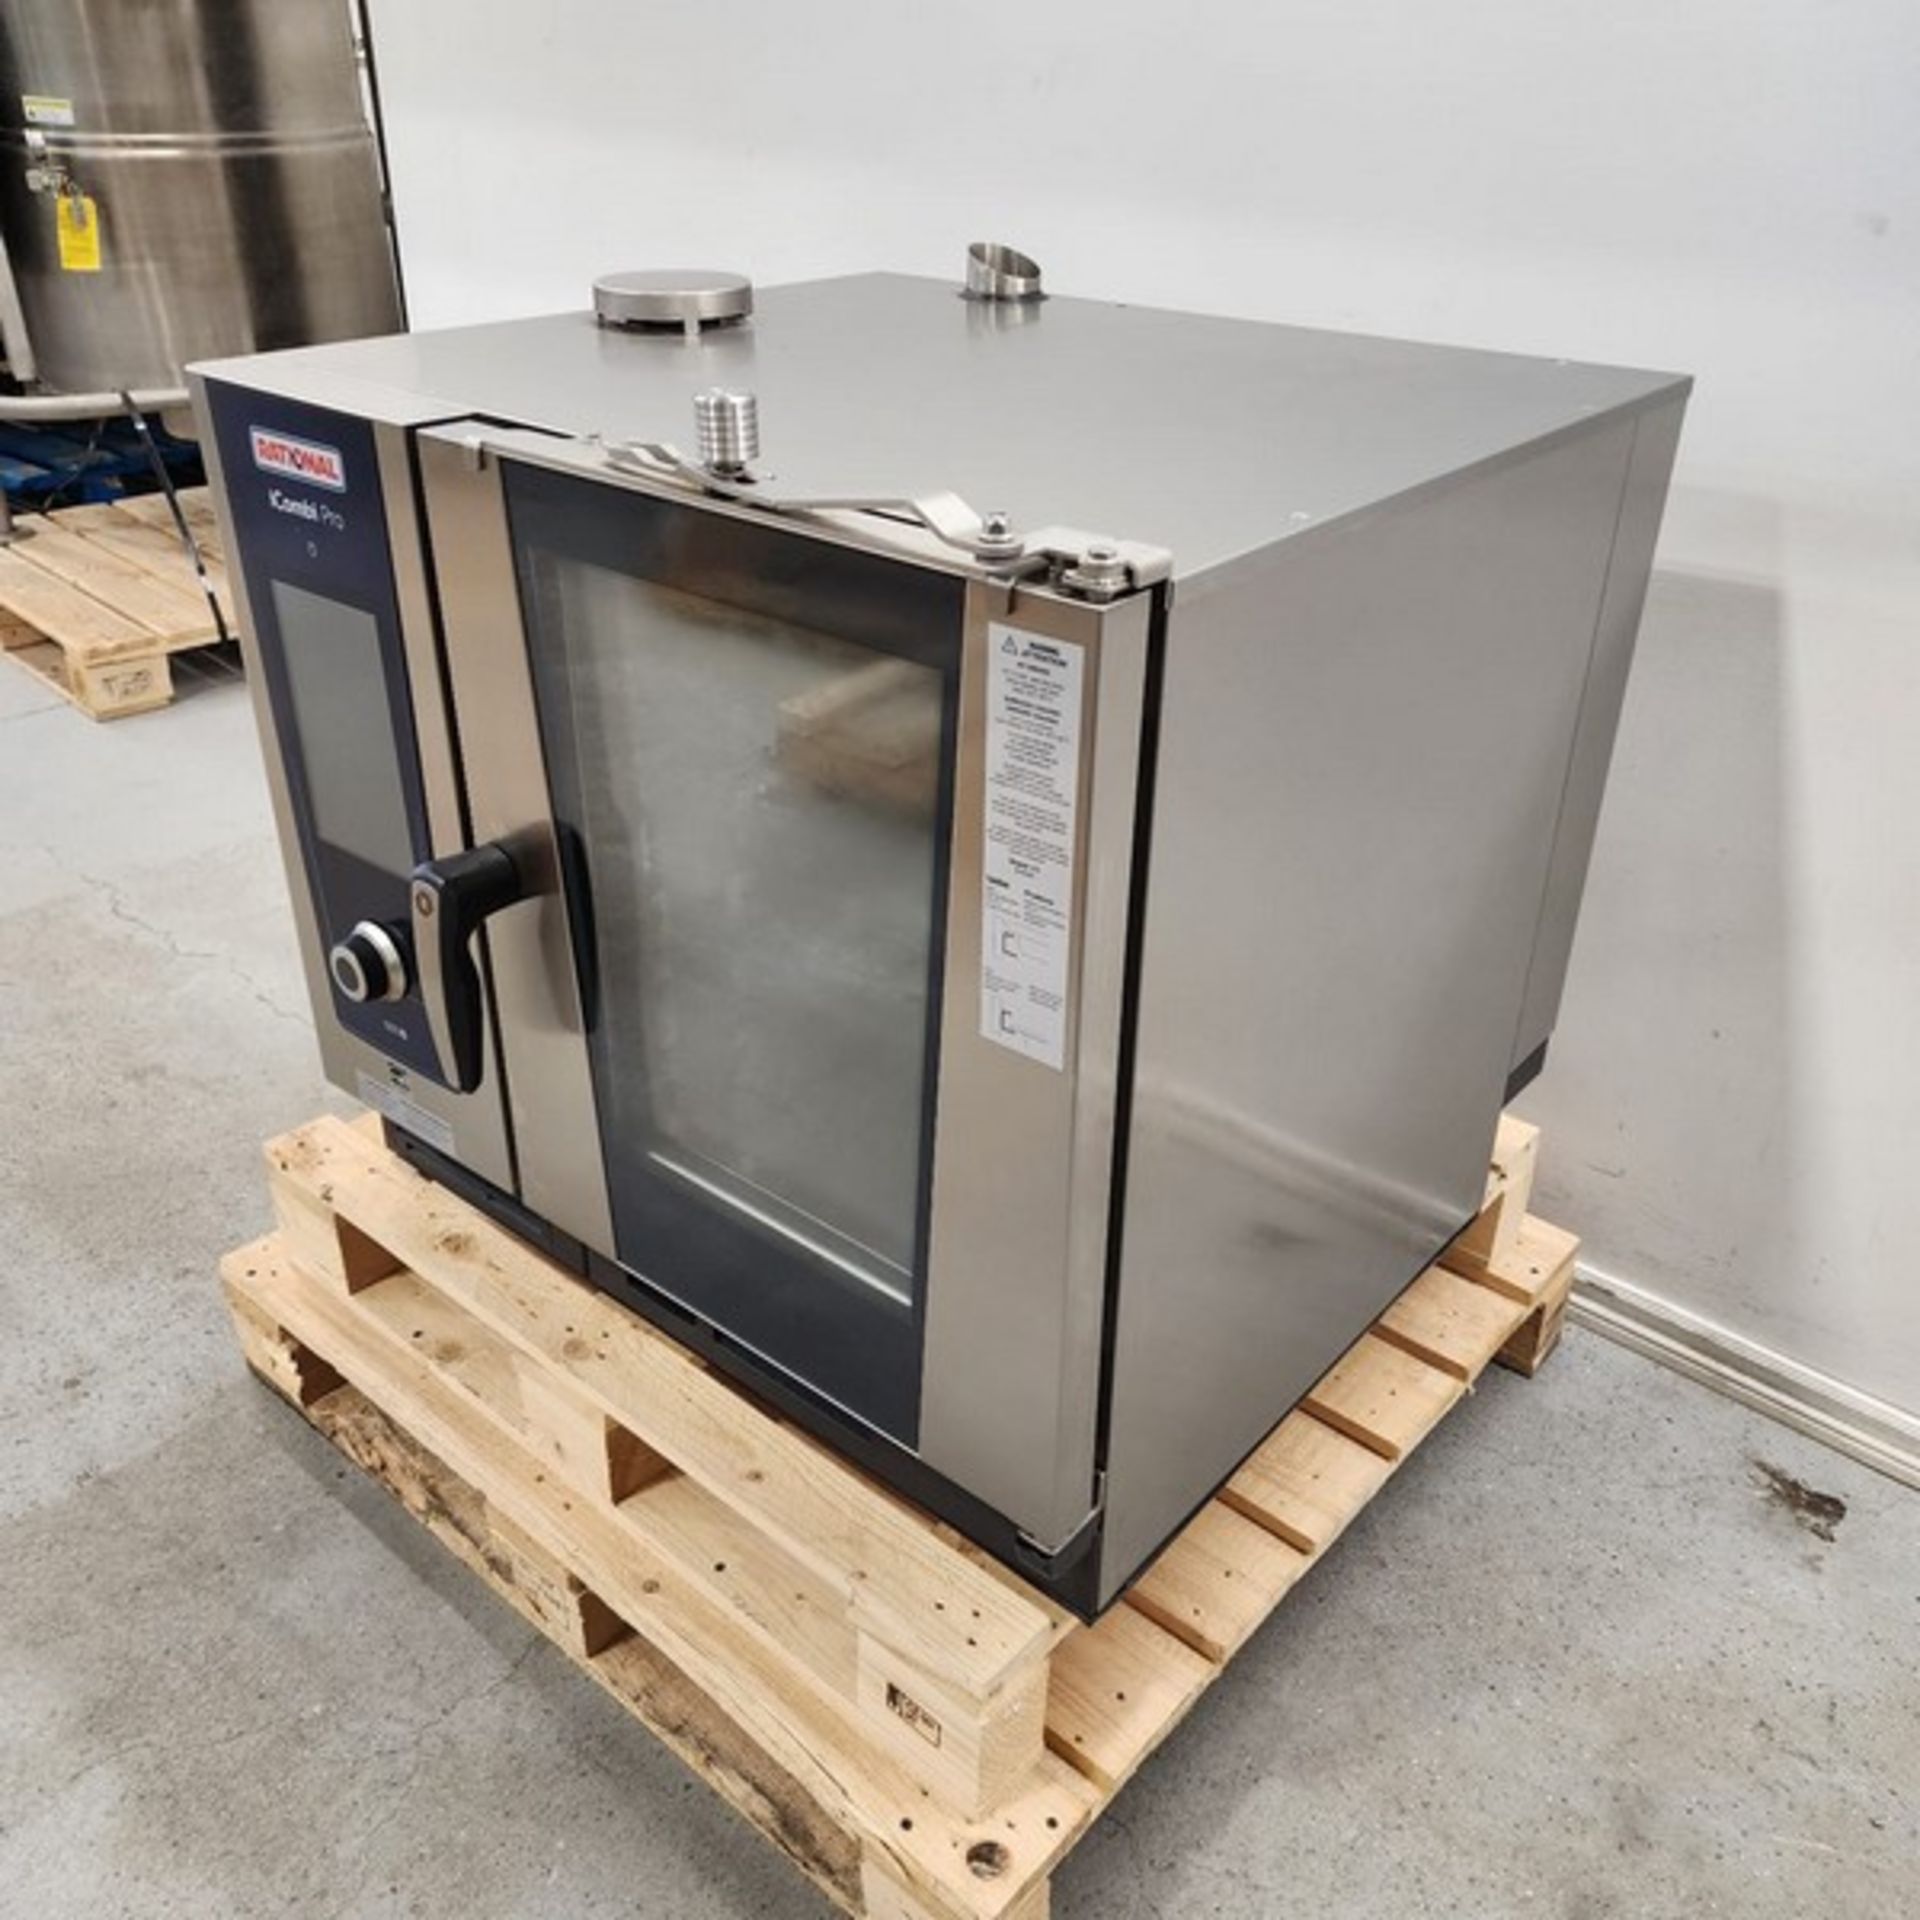 Rational Oven 480 v 3 phase brand new icombi pro new condition (Item #103R) (simple loading Fee $ - Bild 7 aus 7